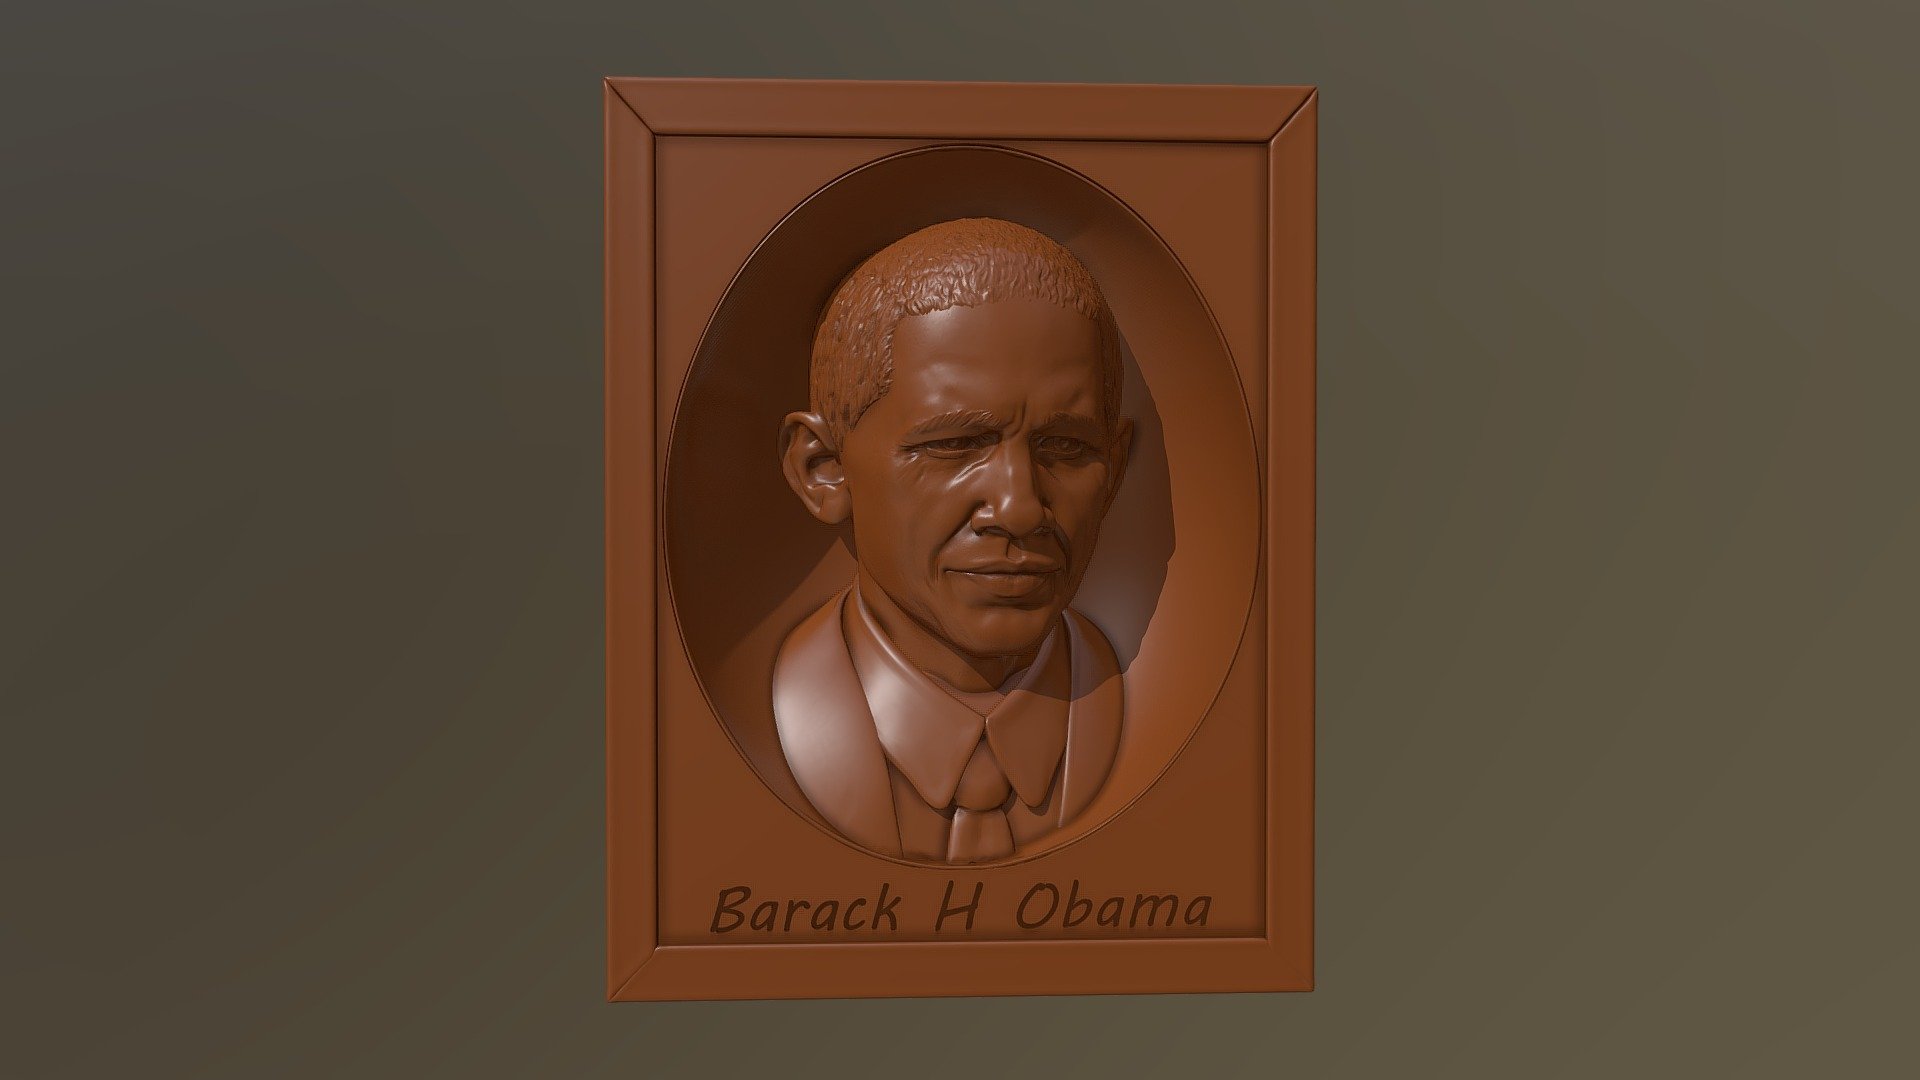 Wood carvings 3d bust of Barack Obama that i did for for Splash Carpentry (http://splashcarpentry.com)
Me and my collegues made all 43 US Presidents busts.
More info on the project https://kickstarter.com/projects/splashcarpentry/the-presidents - Barack Obama - 3D model by kostikim 3d model